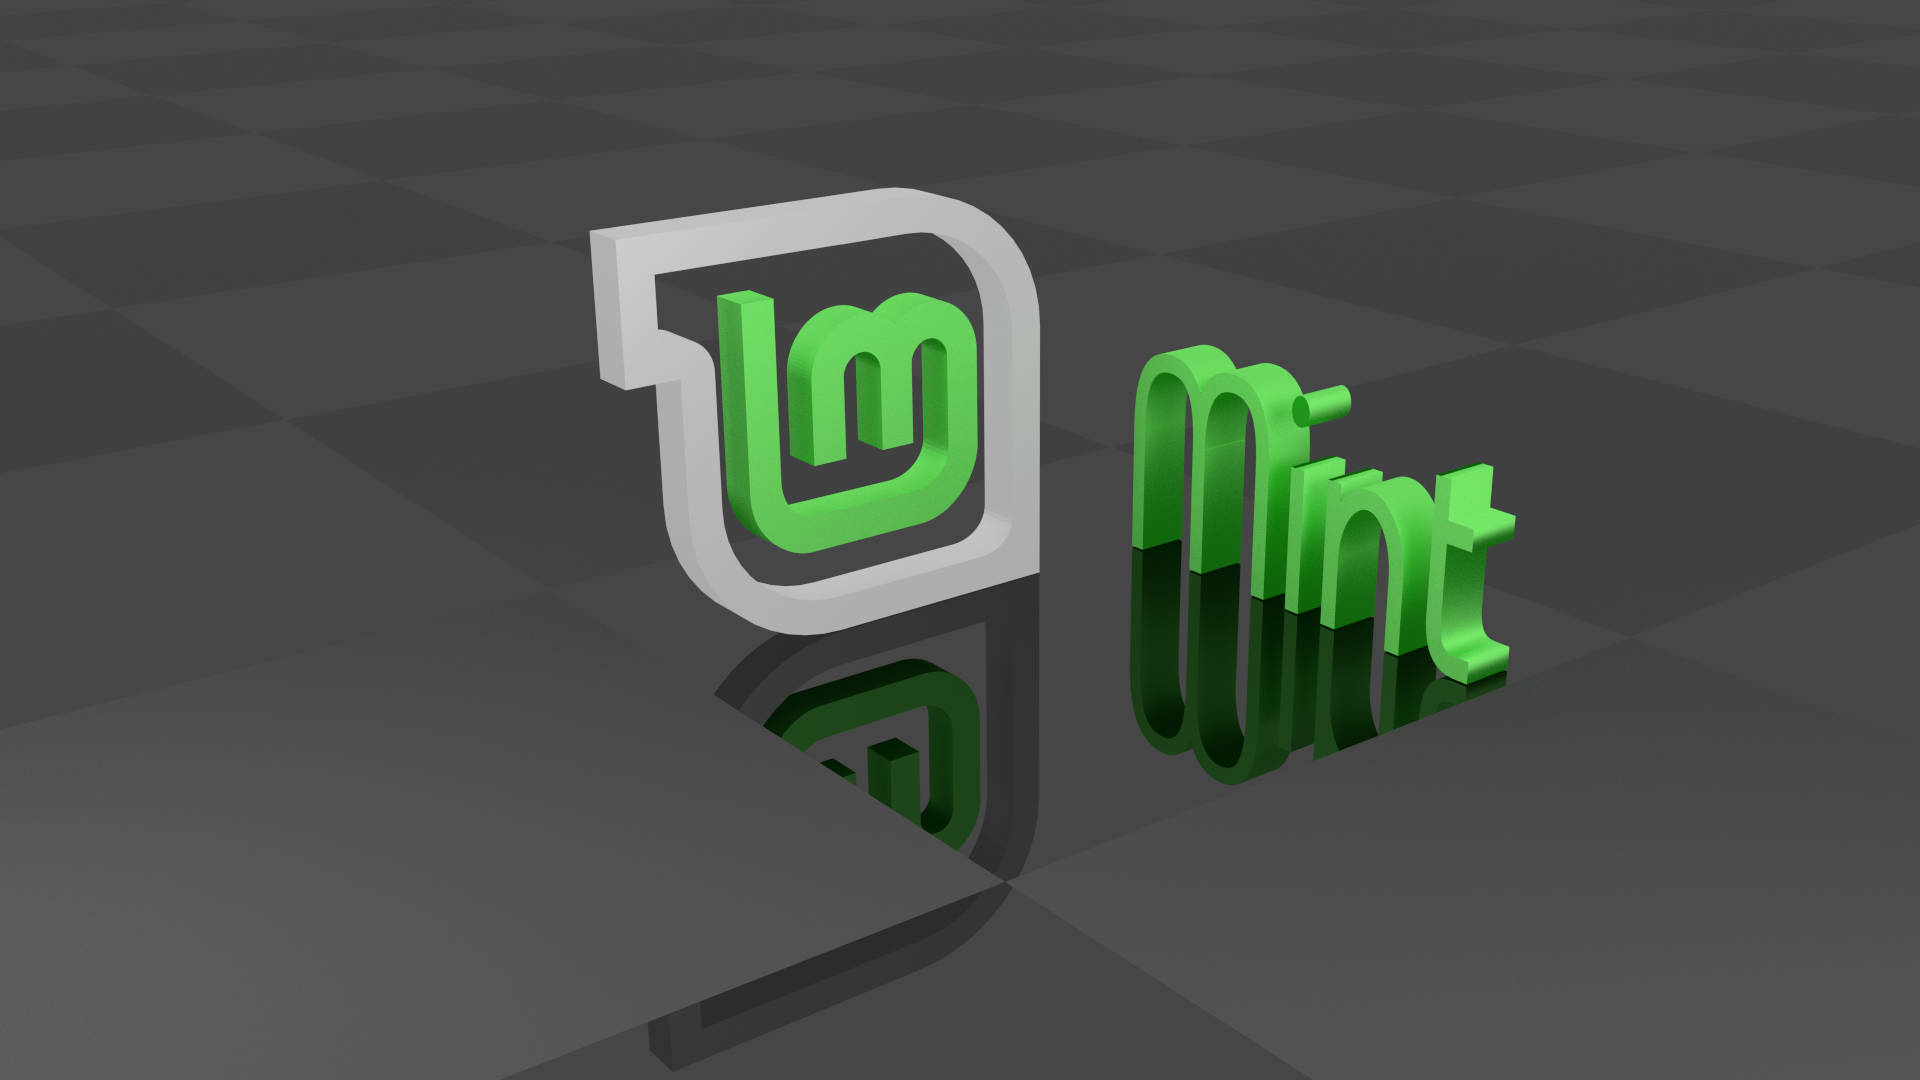 The 3d Logo Of The Linux Mint Operating System Displayed On Graphical Tiles. Background